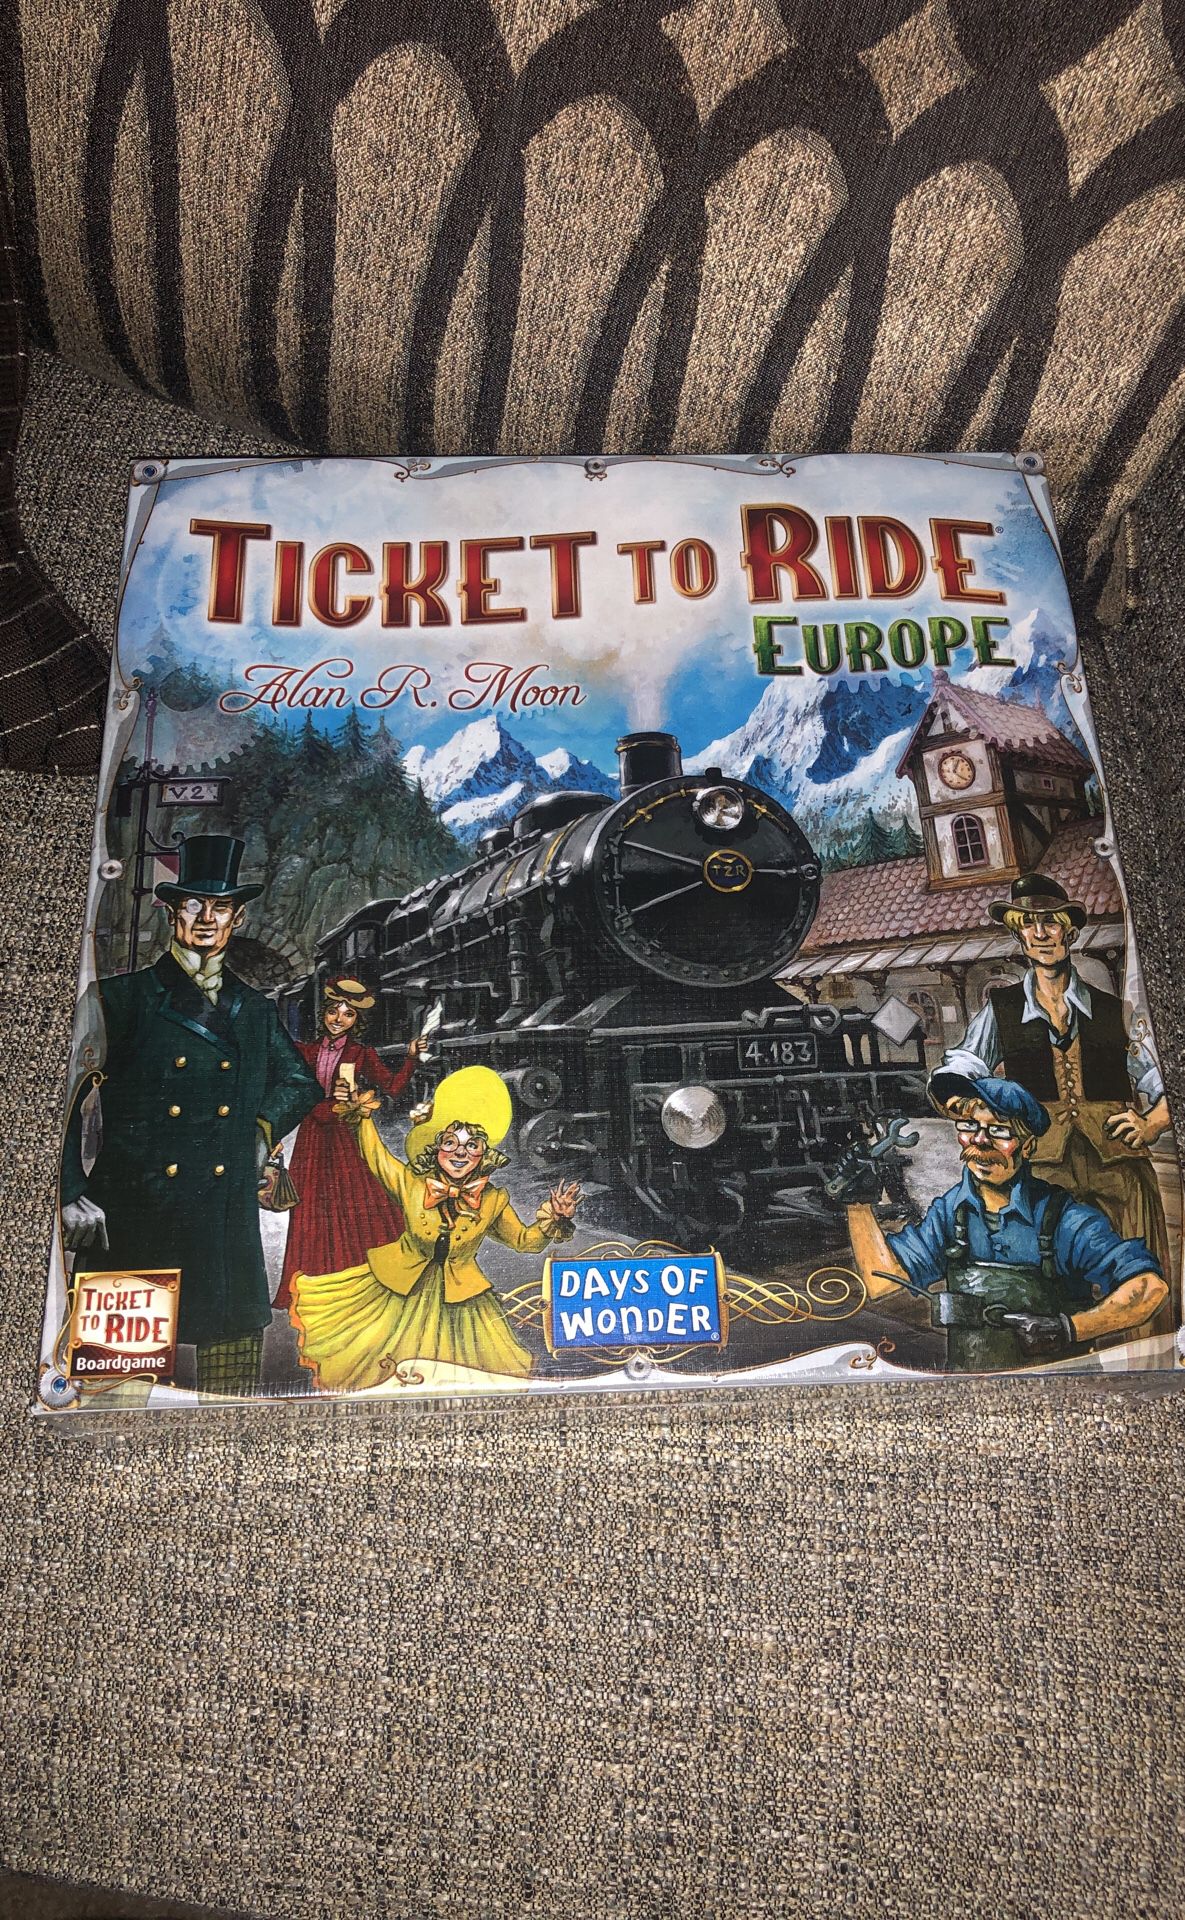 Ticket To Ride Europe , Game. Please see all the pictures and read the description